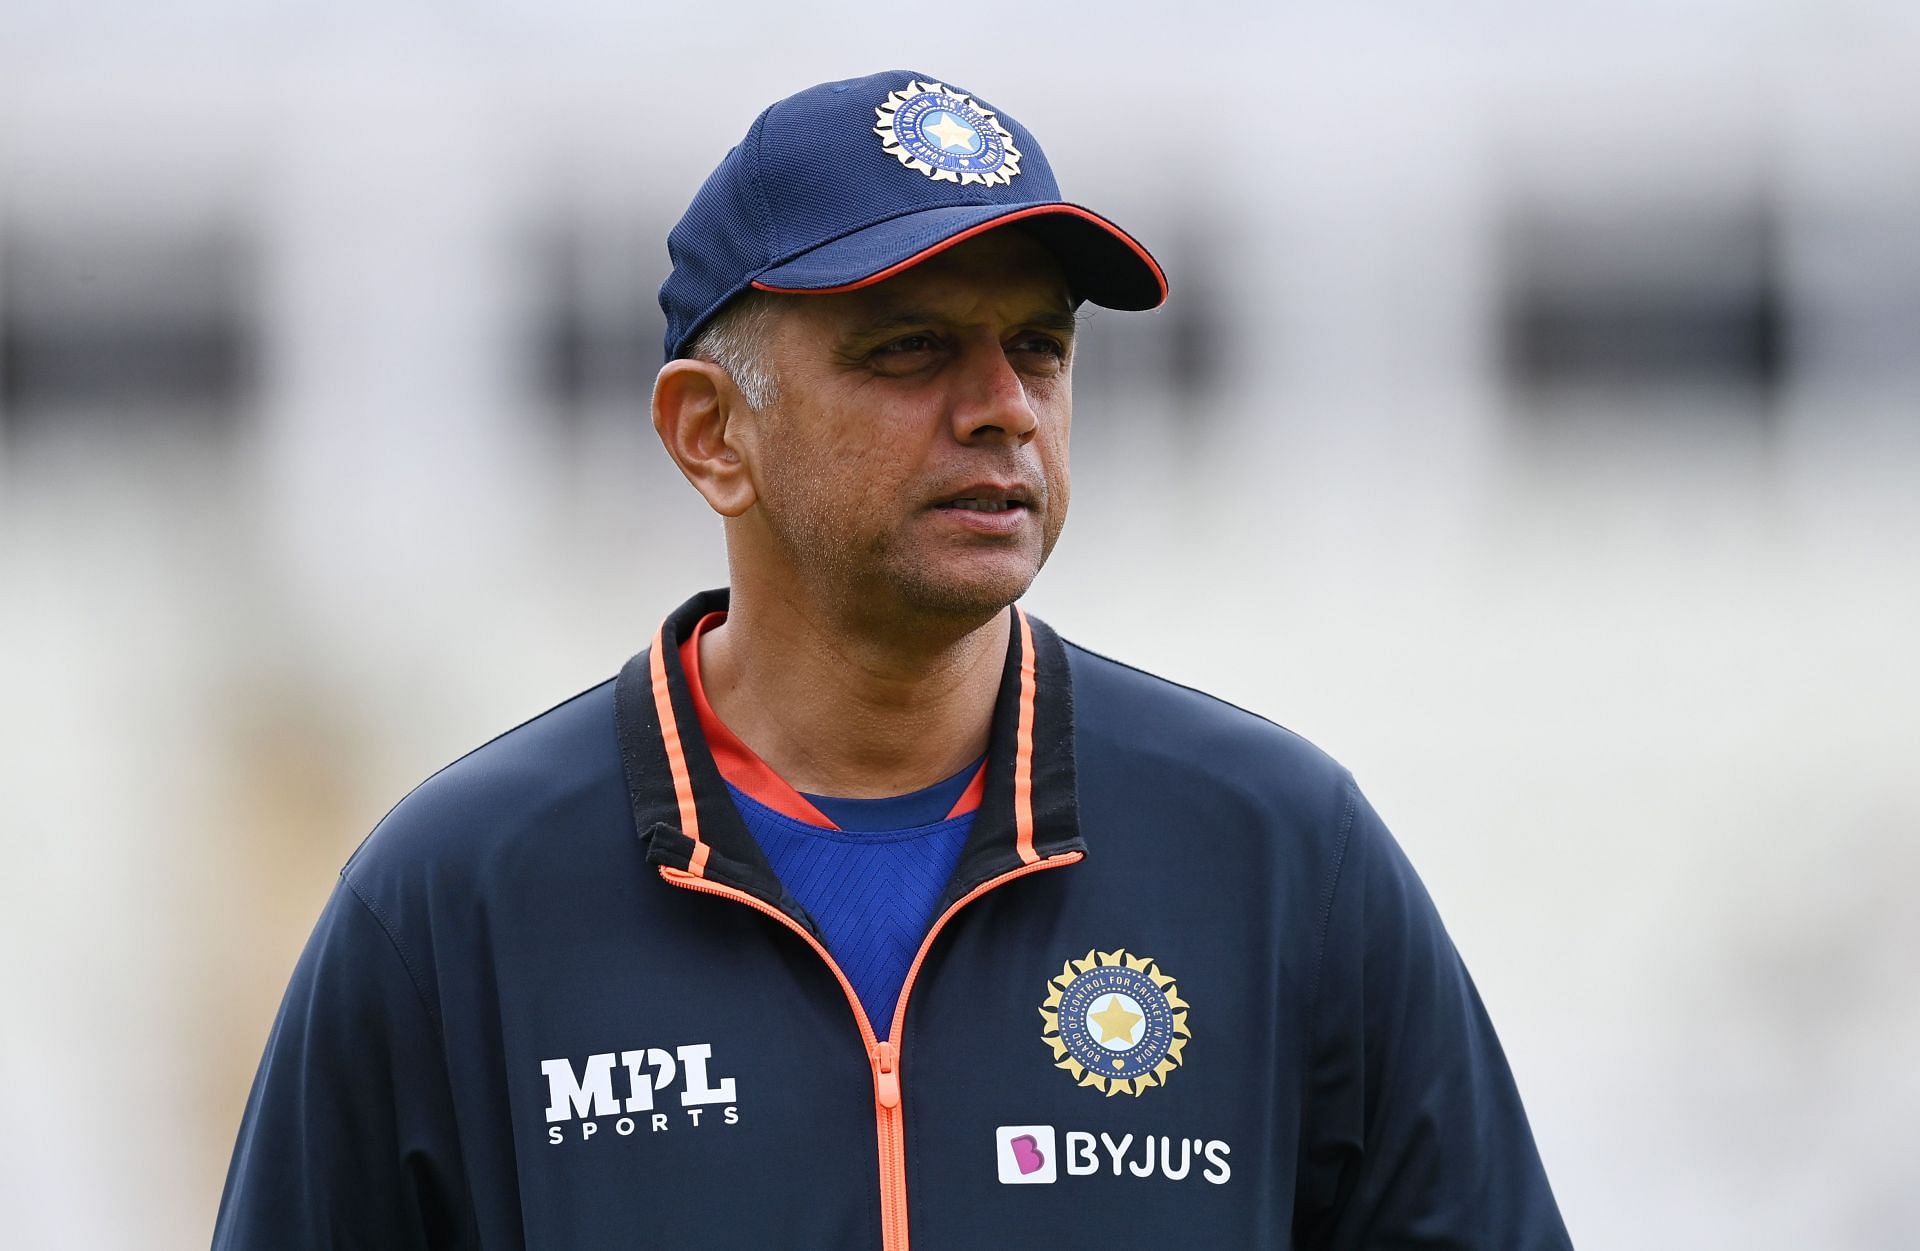 India head coach Rahul Dravid. (Credit: Getty Images)